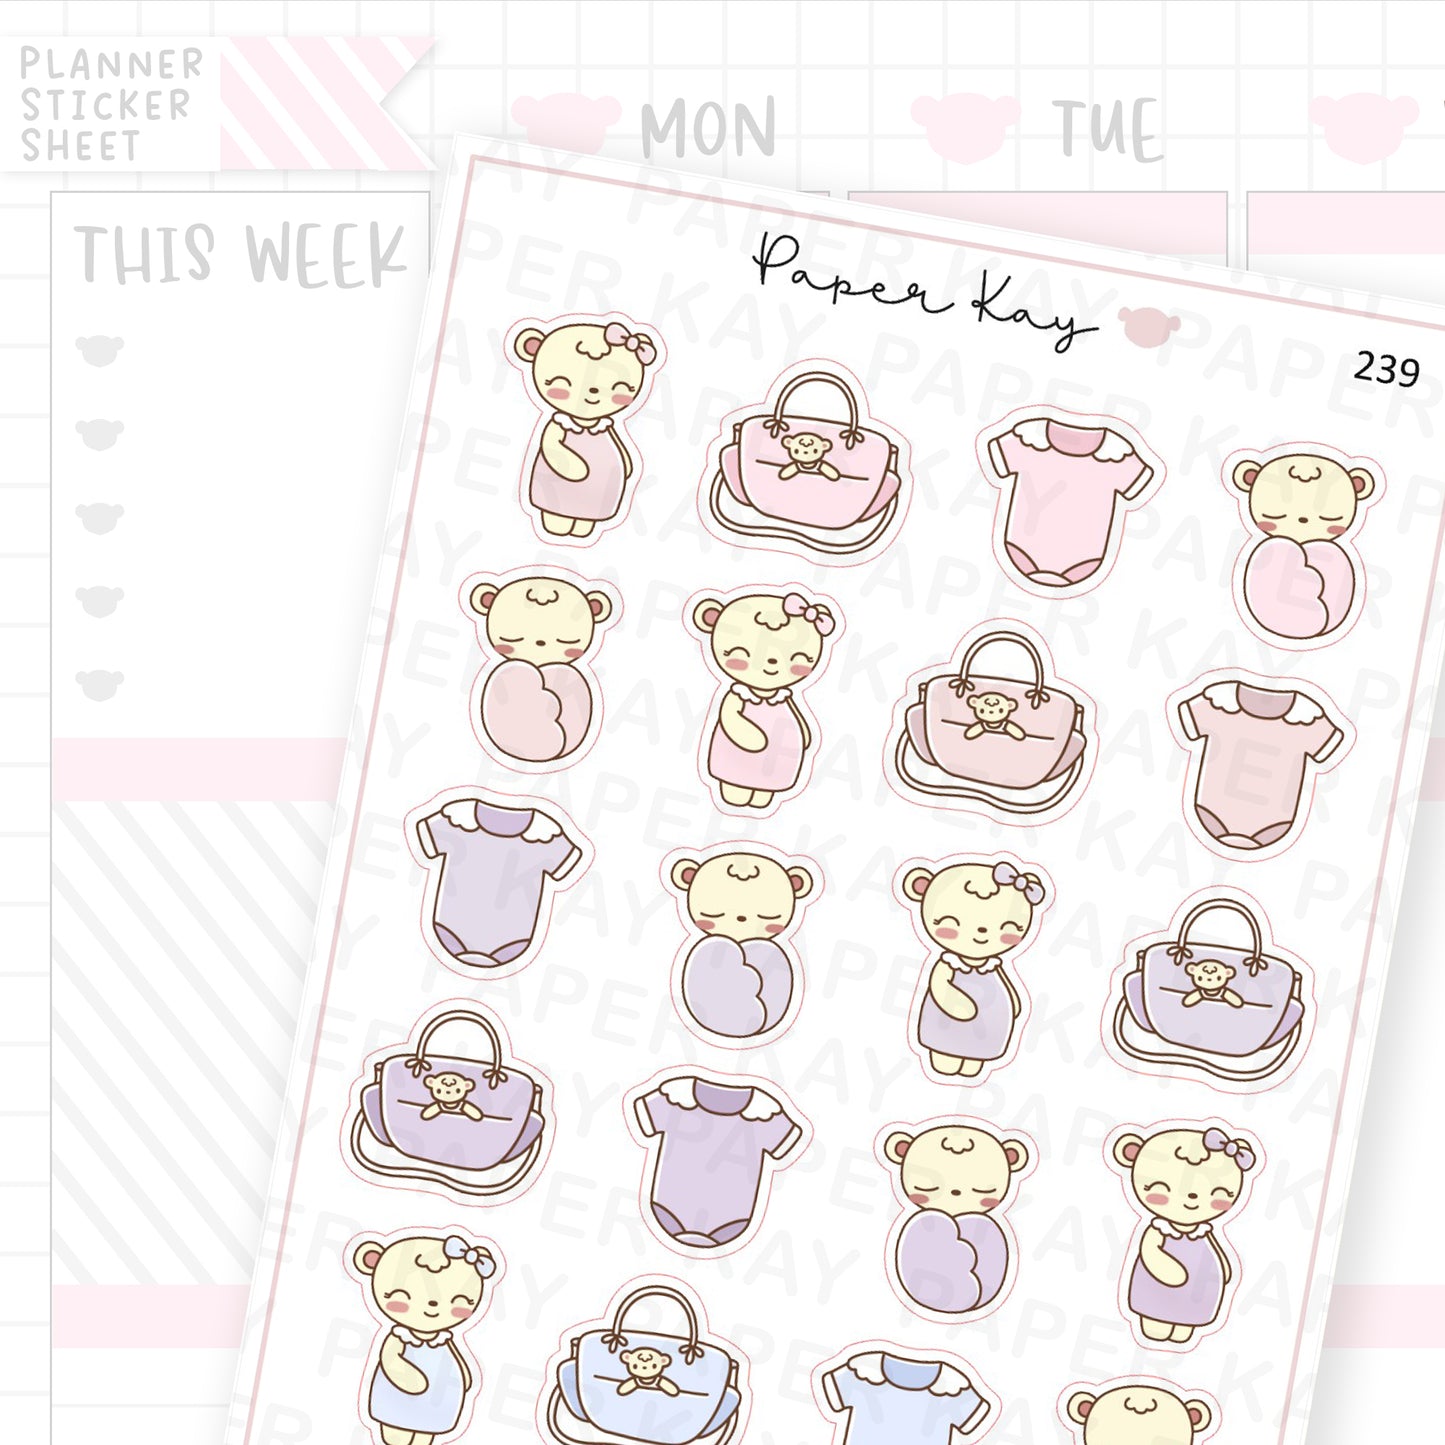 Pregnant Mother and Baby Sticker Sheet